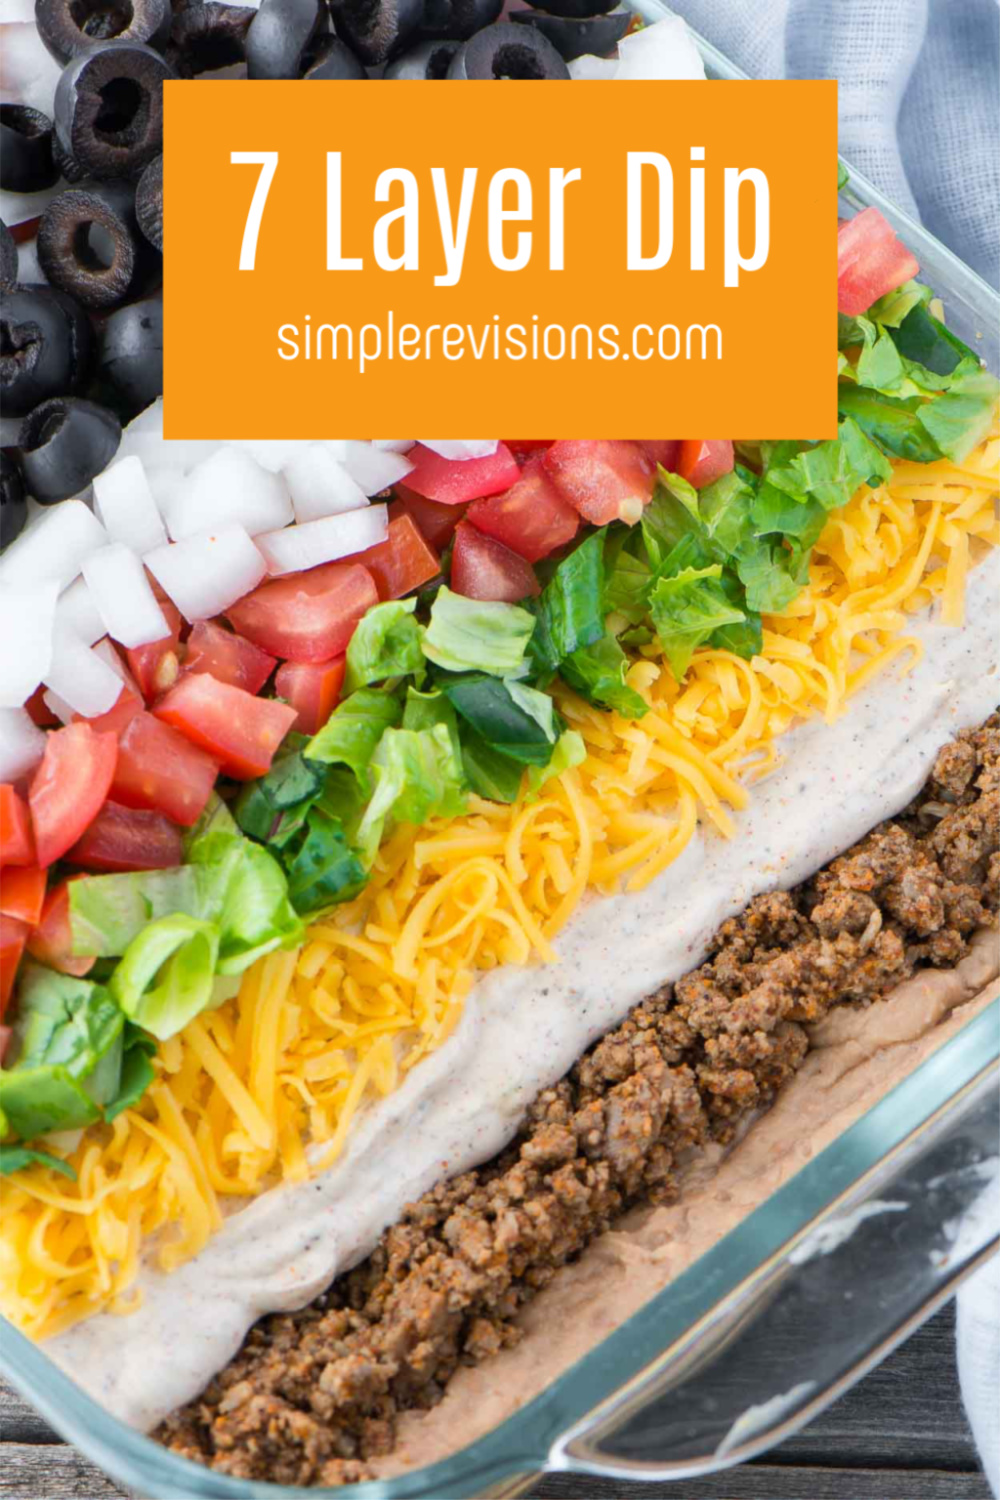 How to Make The Best 7 Layer Dip - Simple Revisions